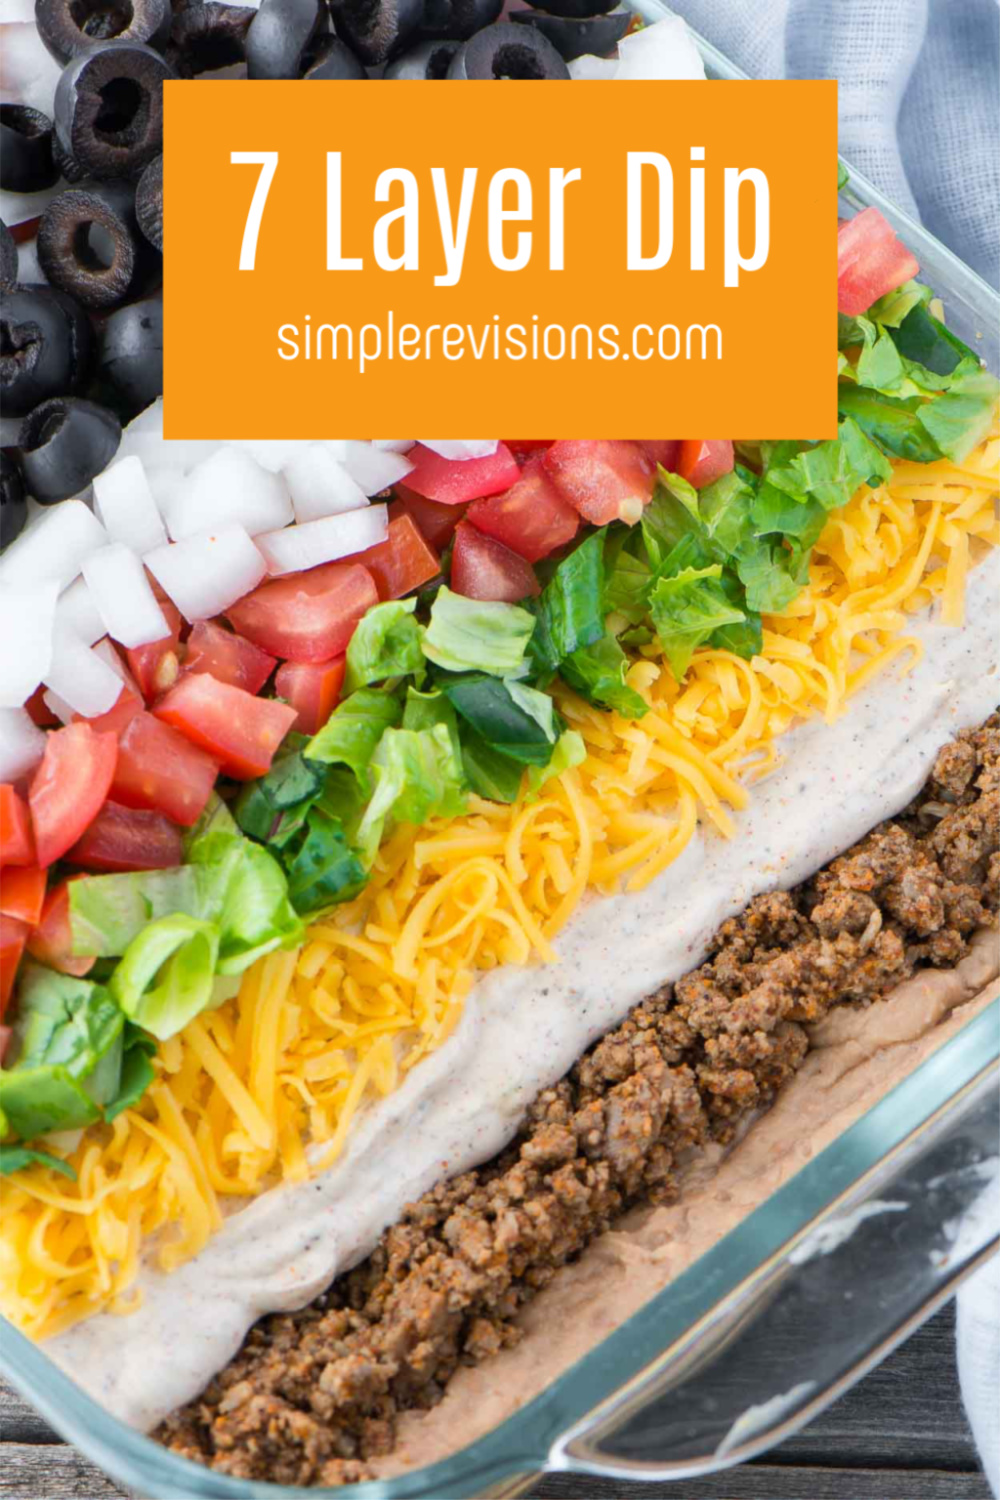 How to Make The Best 7 Layer Dip - Simple Revisions